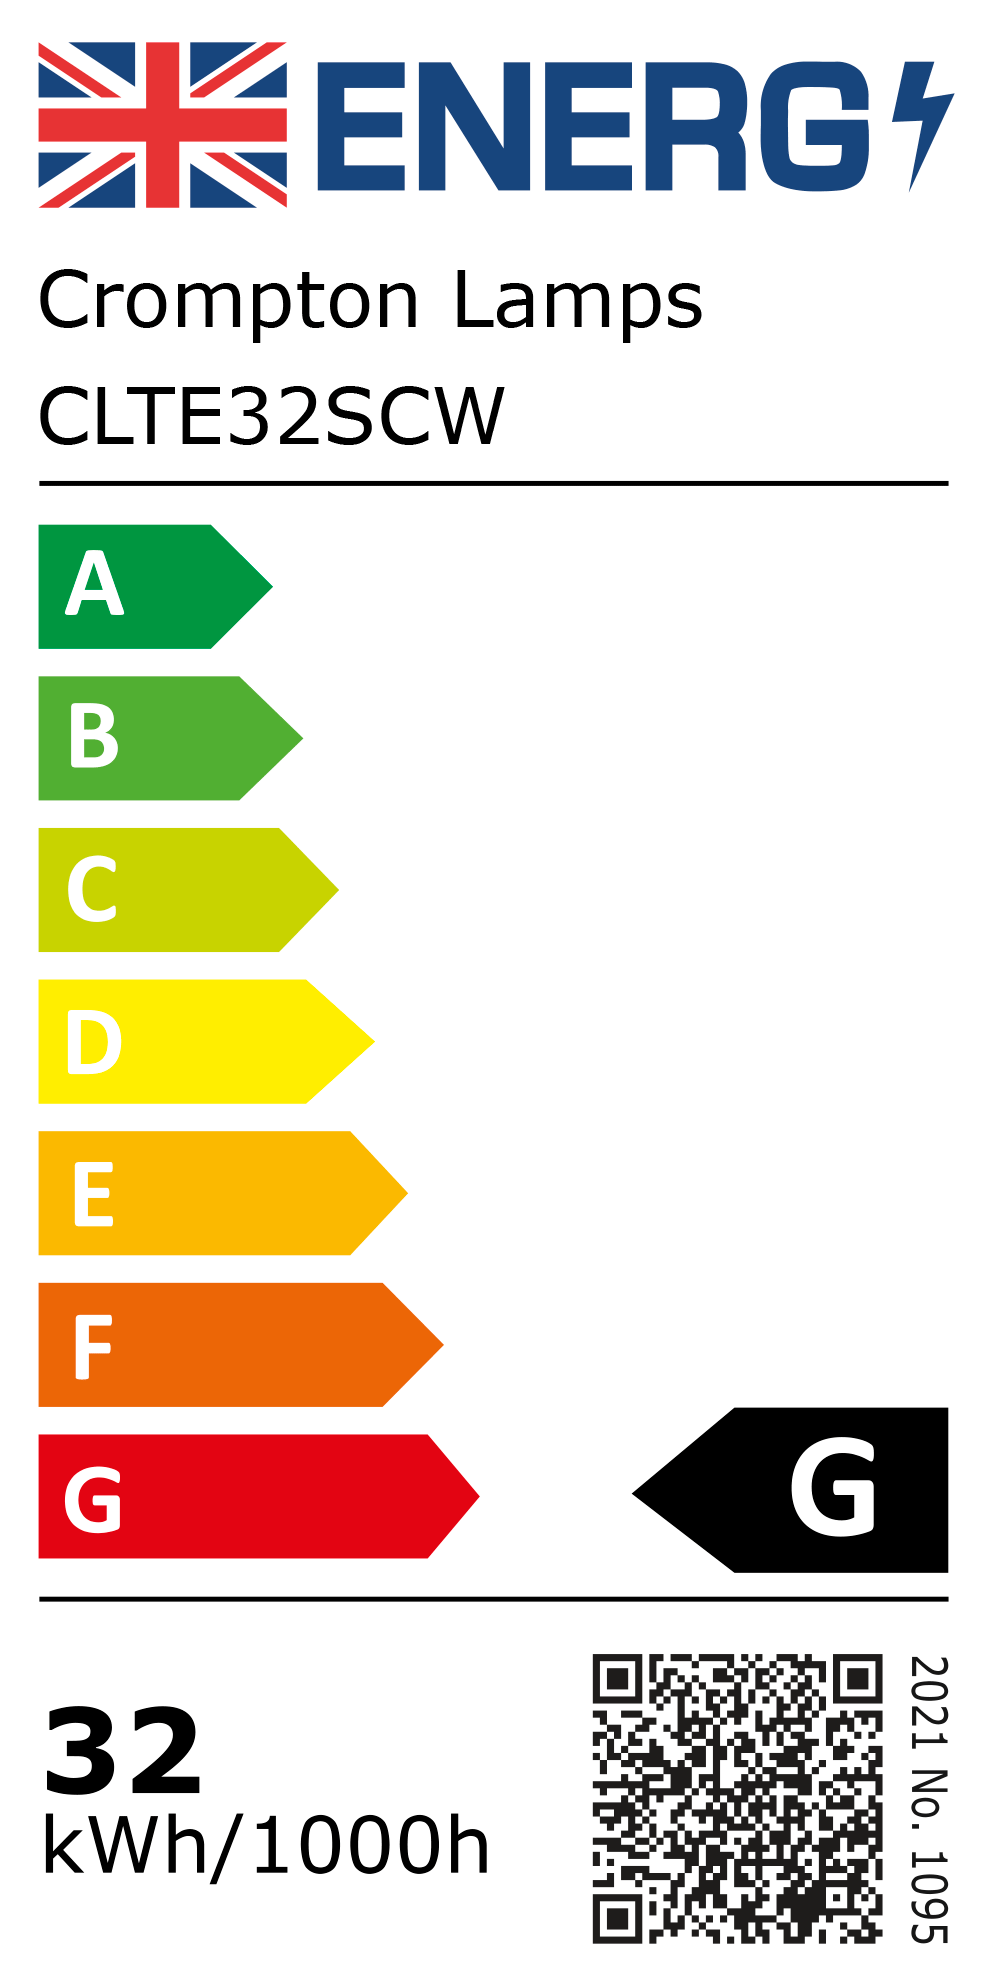 New 2021 Energy Rating Label: Stock Code CLTE32SCW